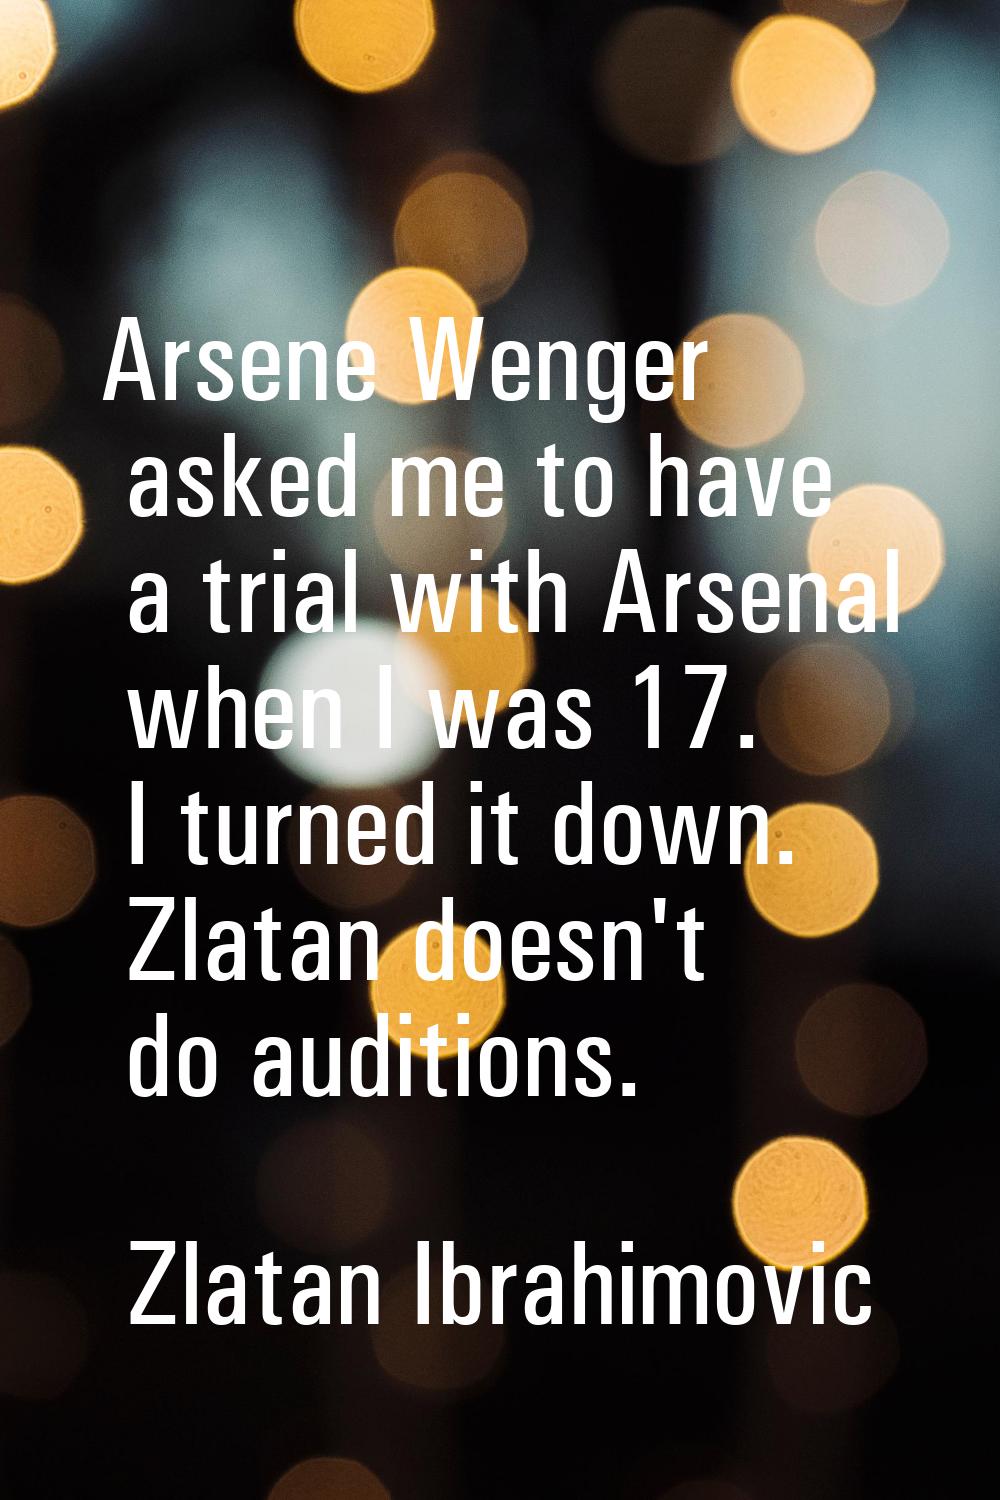 Arsene Wenger asked me to have a trial with Arsenal when I was 17. I turned it down. Zlatan doesn't